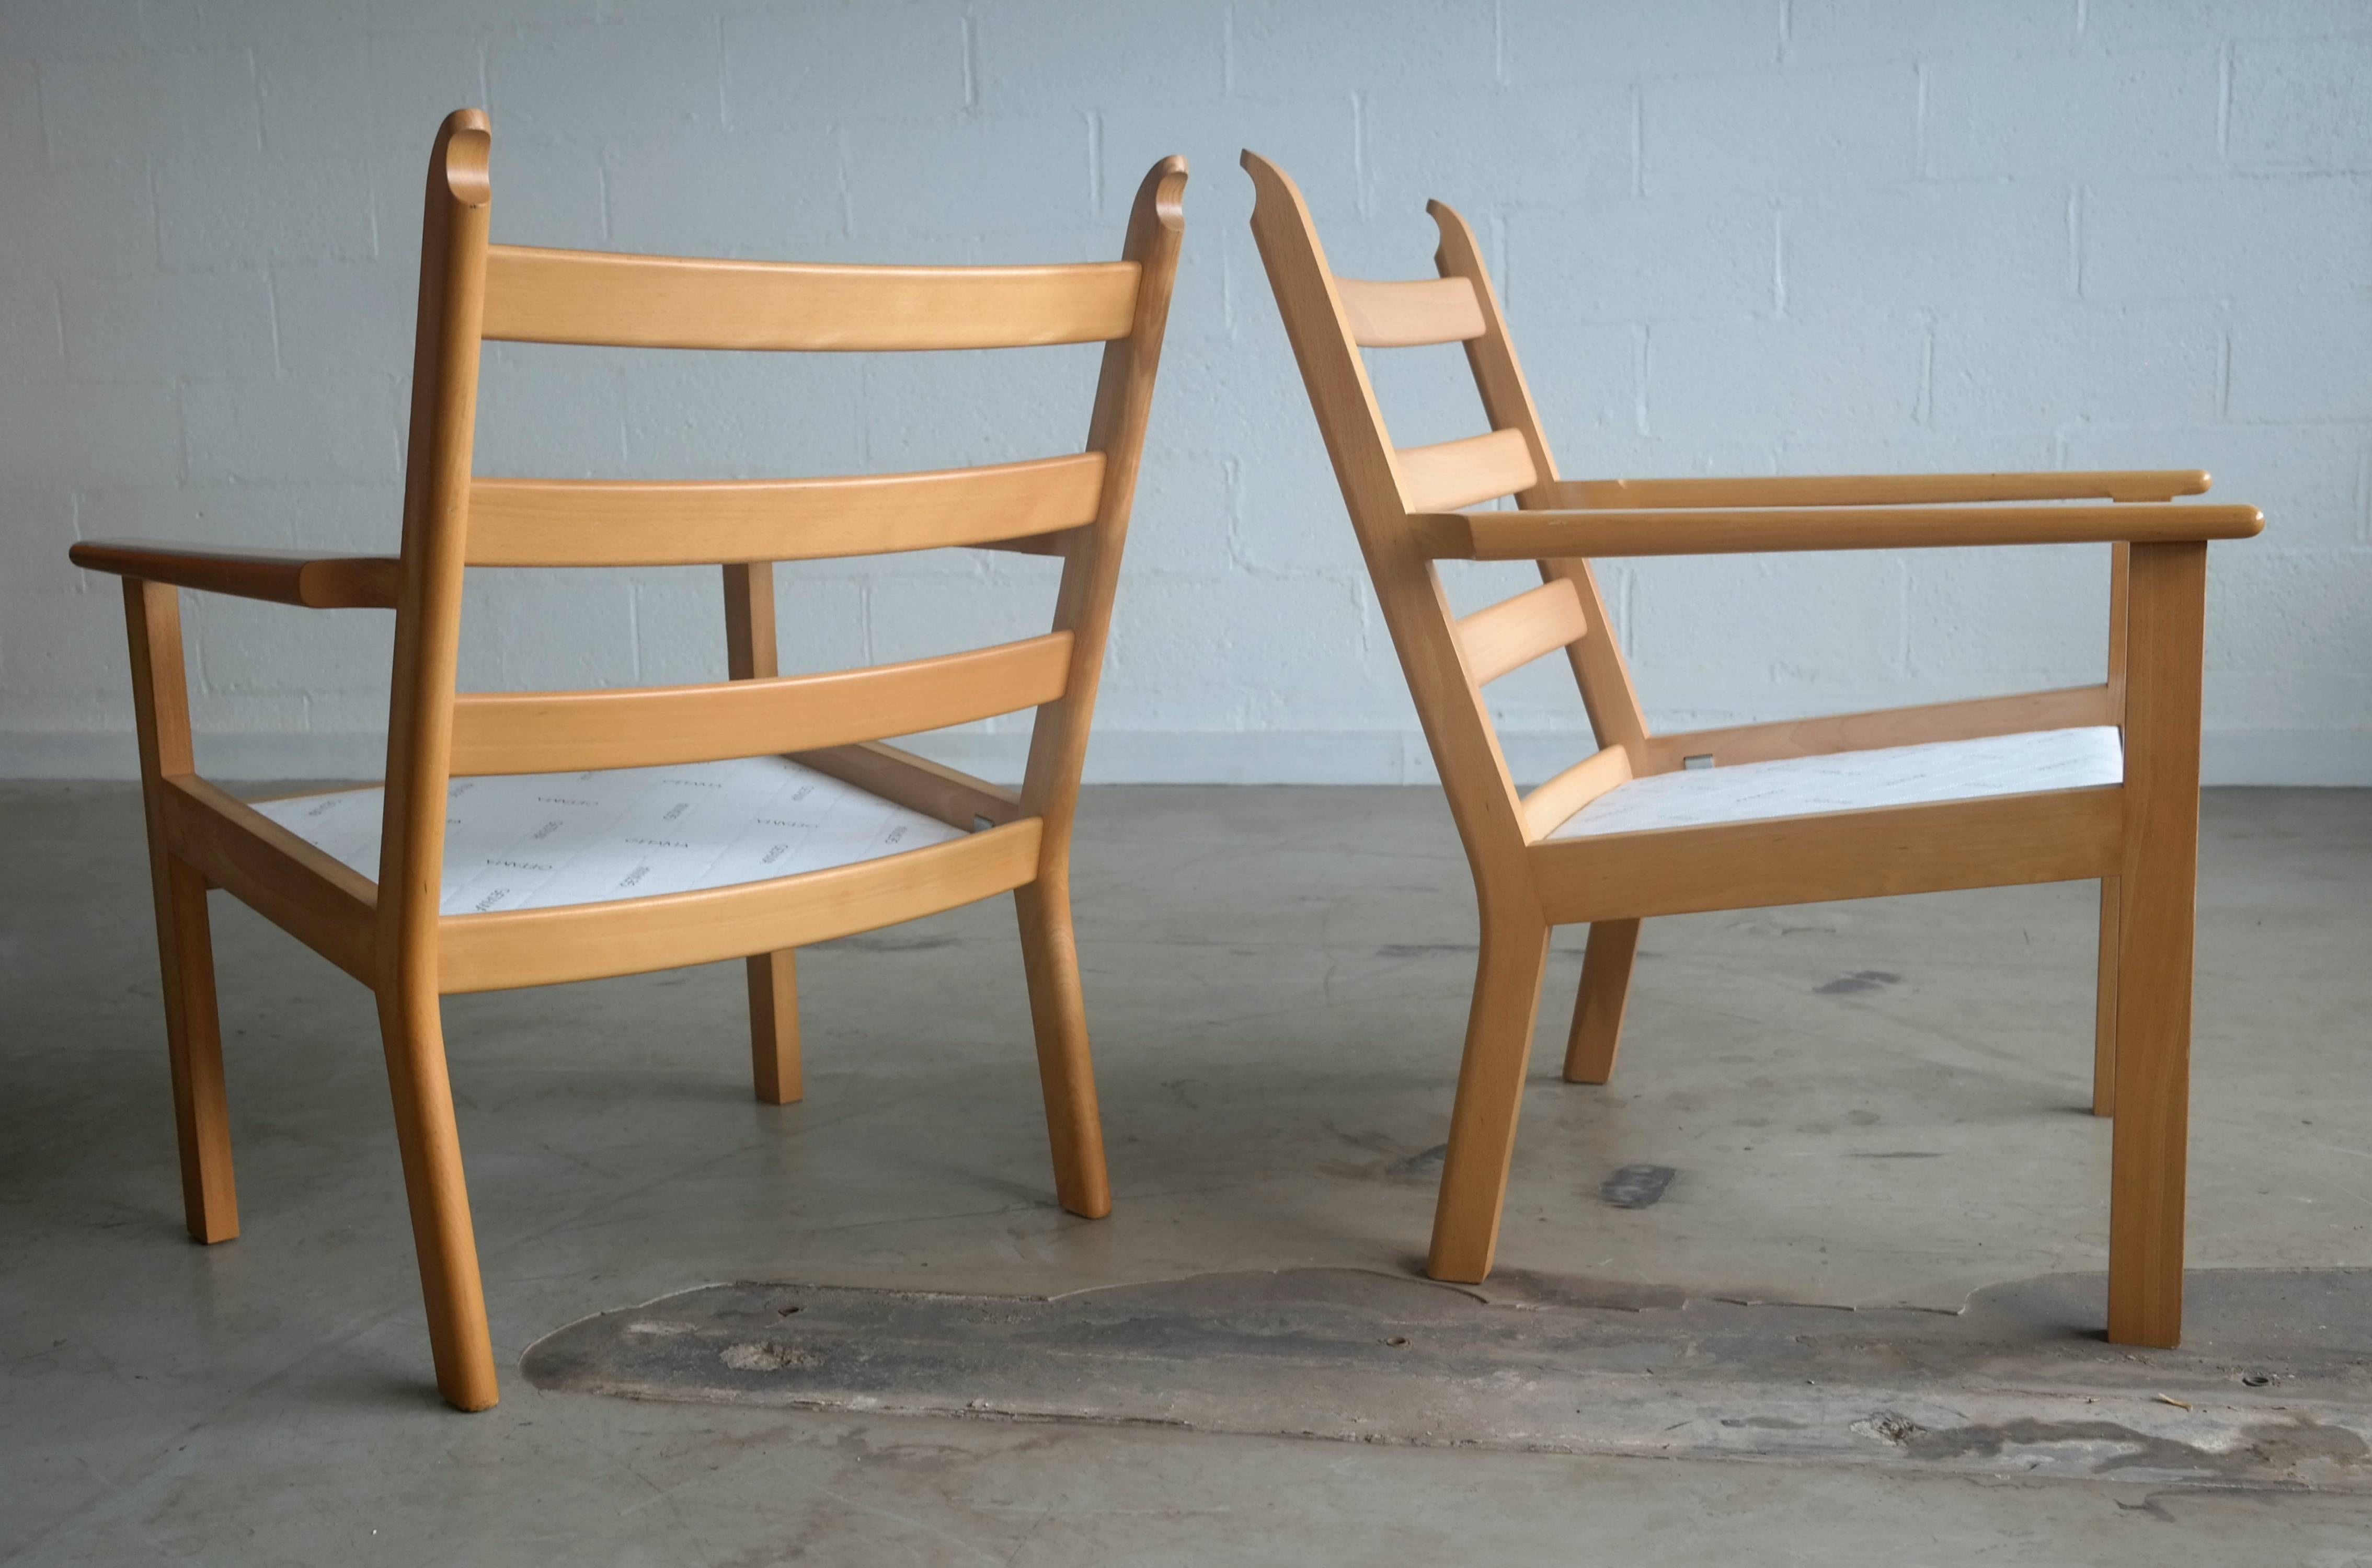 A nice pair of great Danish easy chairs model GE 284 designed by Hans Wegner for GETAMA, Denmark. Chairs are made of solid beechwood and retains original wool fabric by Kvadrat. Some slight scuffing and scratches based on normal wear but overall in